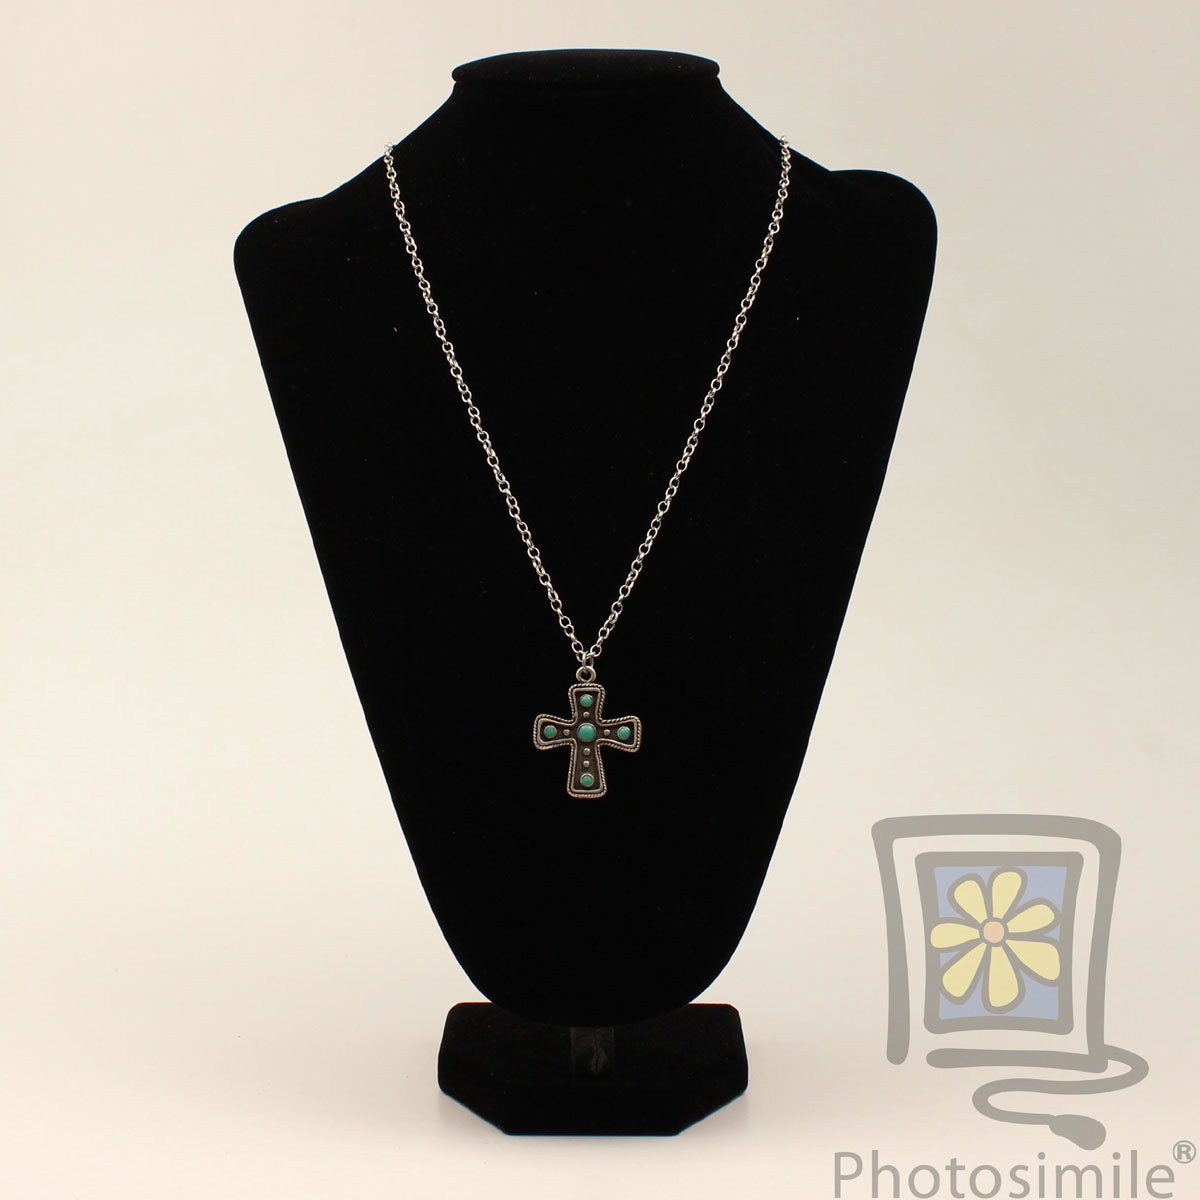 Dbun2113 Antique Silver Cross With Small Stone Inlay Necklace